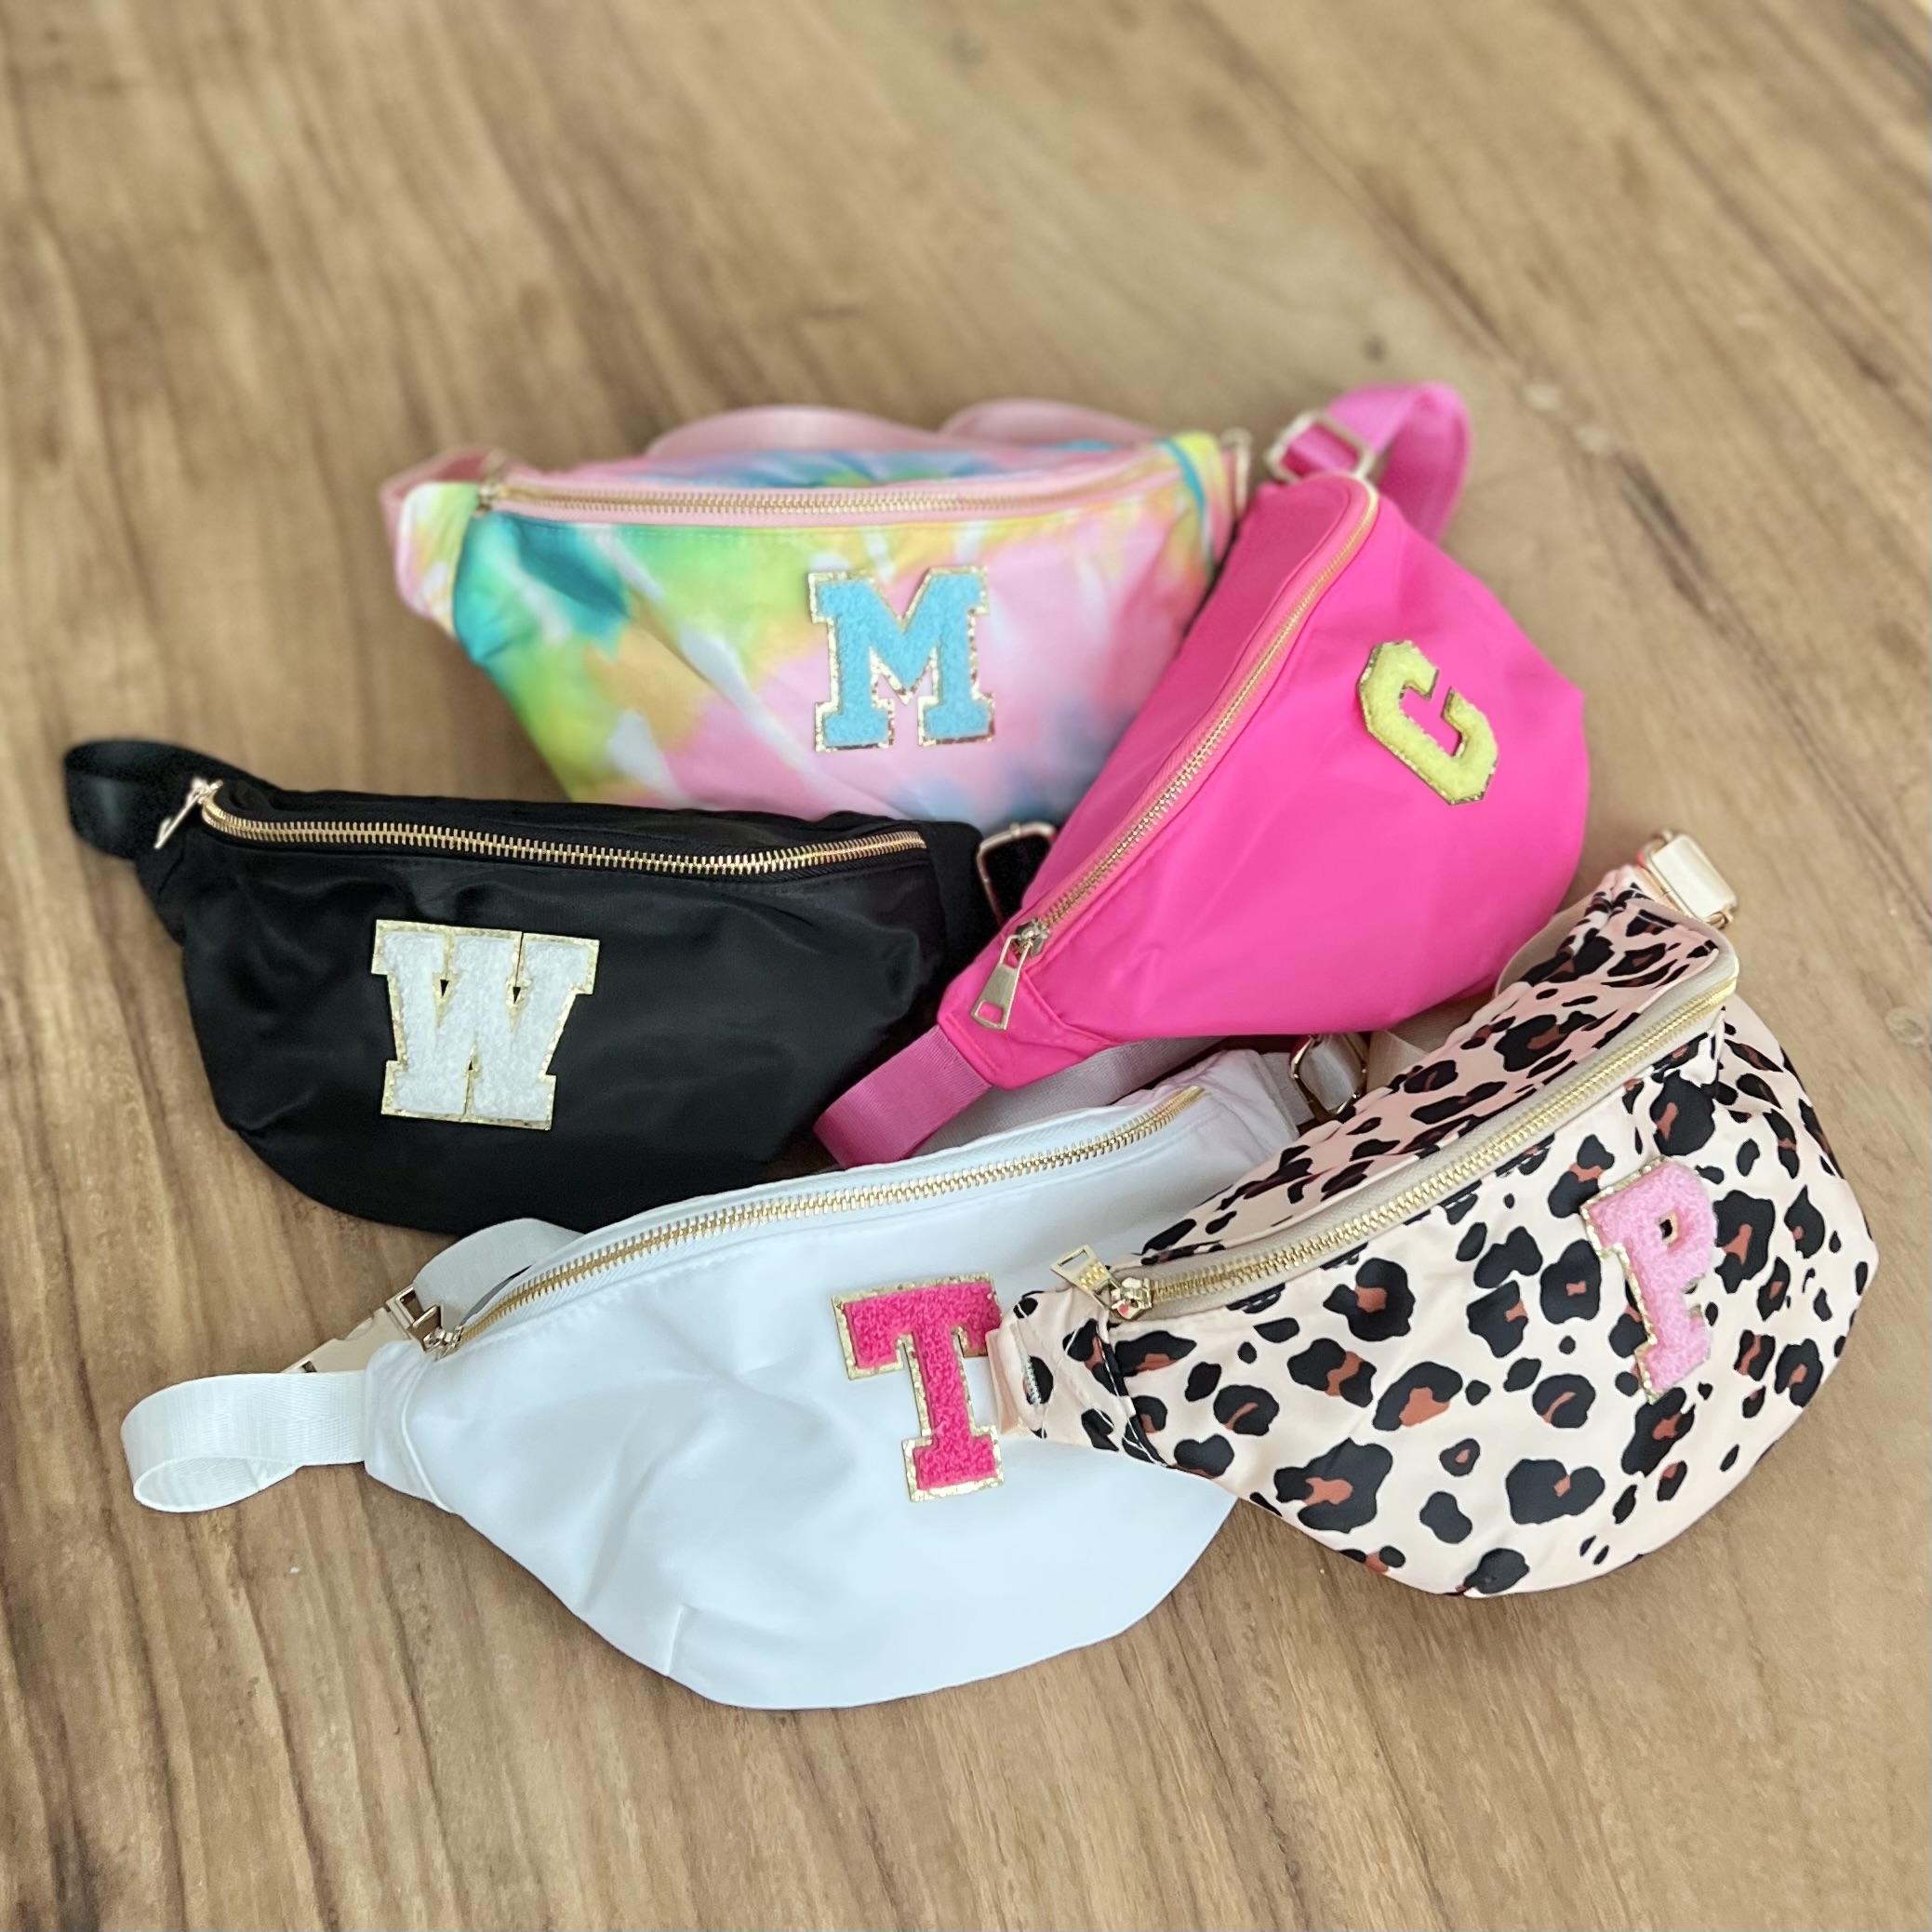 Image of 5 fanny packs on a wooden floor, each a different color with various patch letters on each.